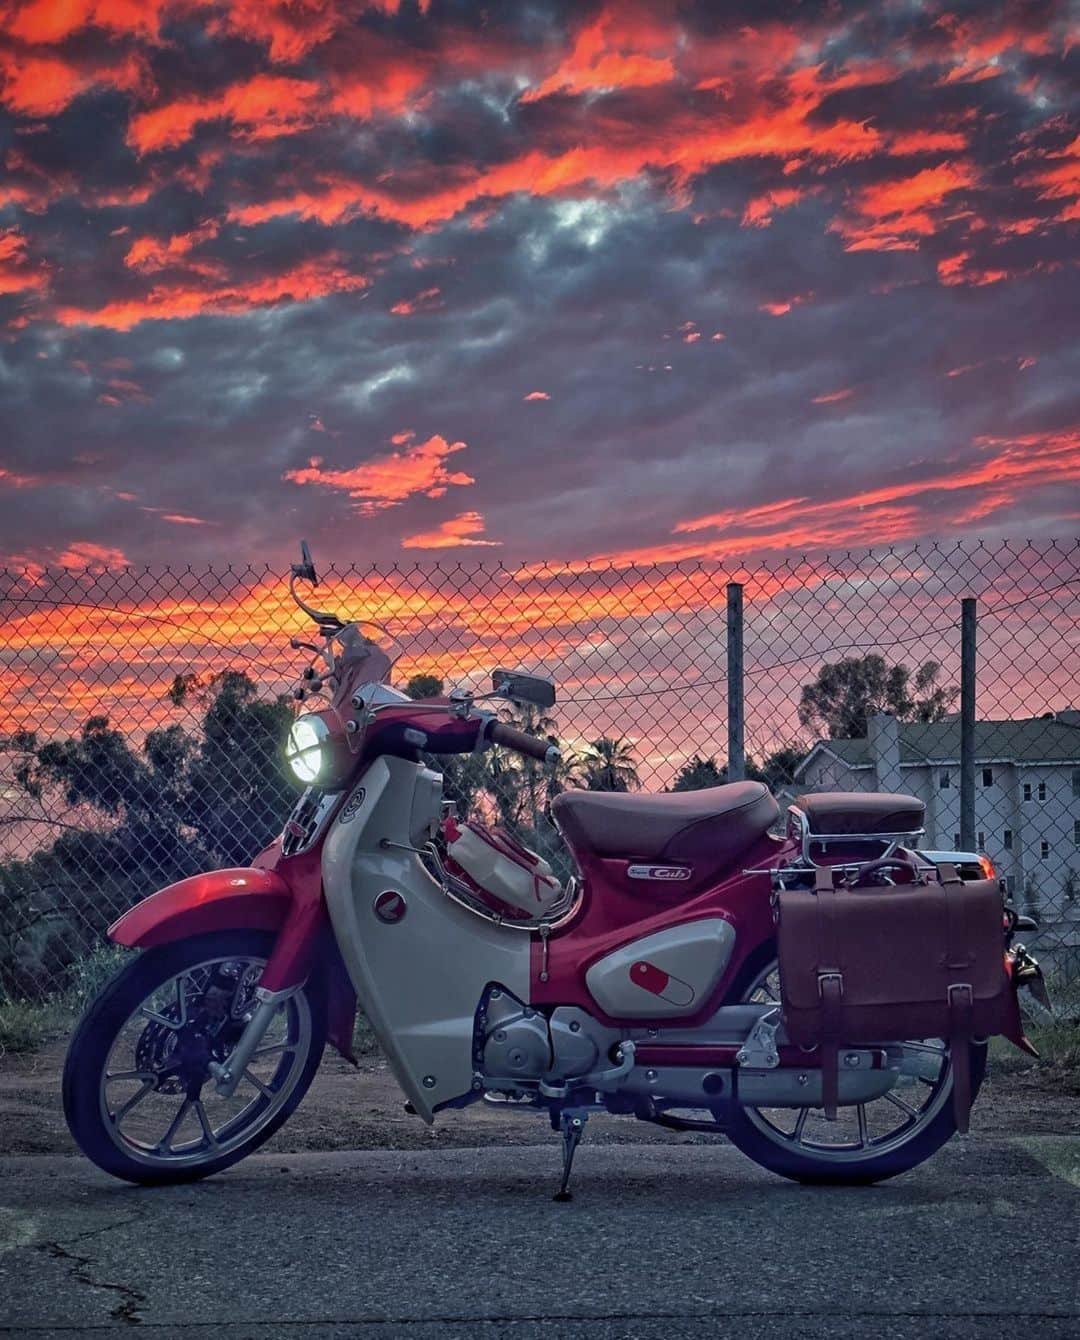 Honda Powersports USのインスタグラム：「Sundays, sunsets, and Super Cubs... just a few of our favorite things. 🌇 Thanks for tagging us, @supercubrider! #miniMOTO #SuperCub #BetterOnAHonda」